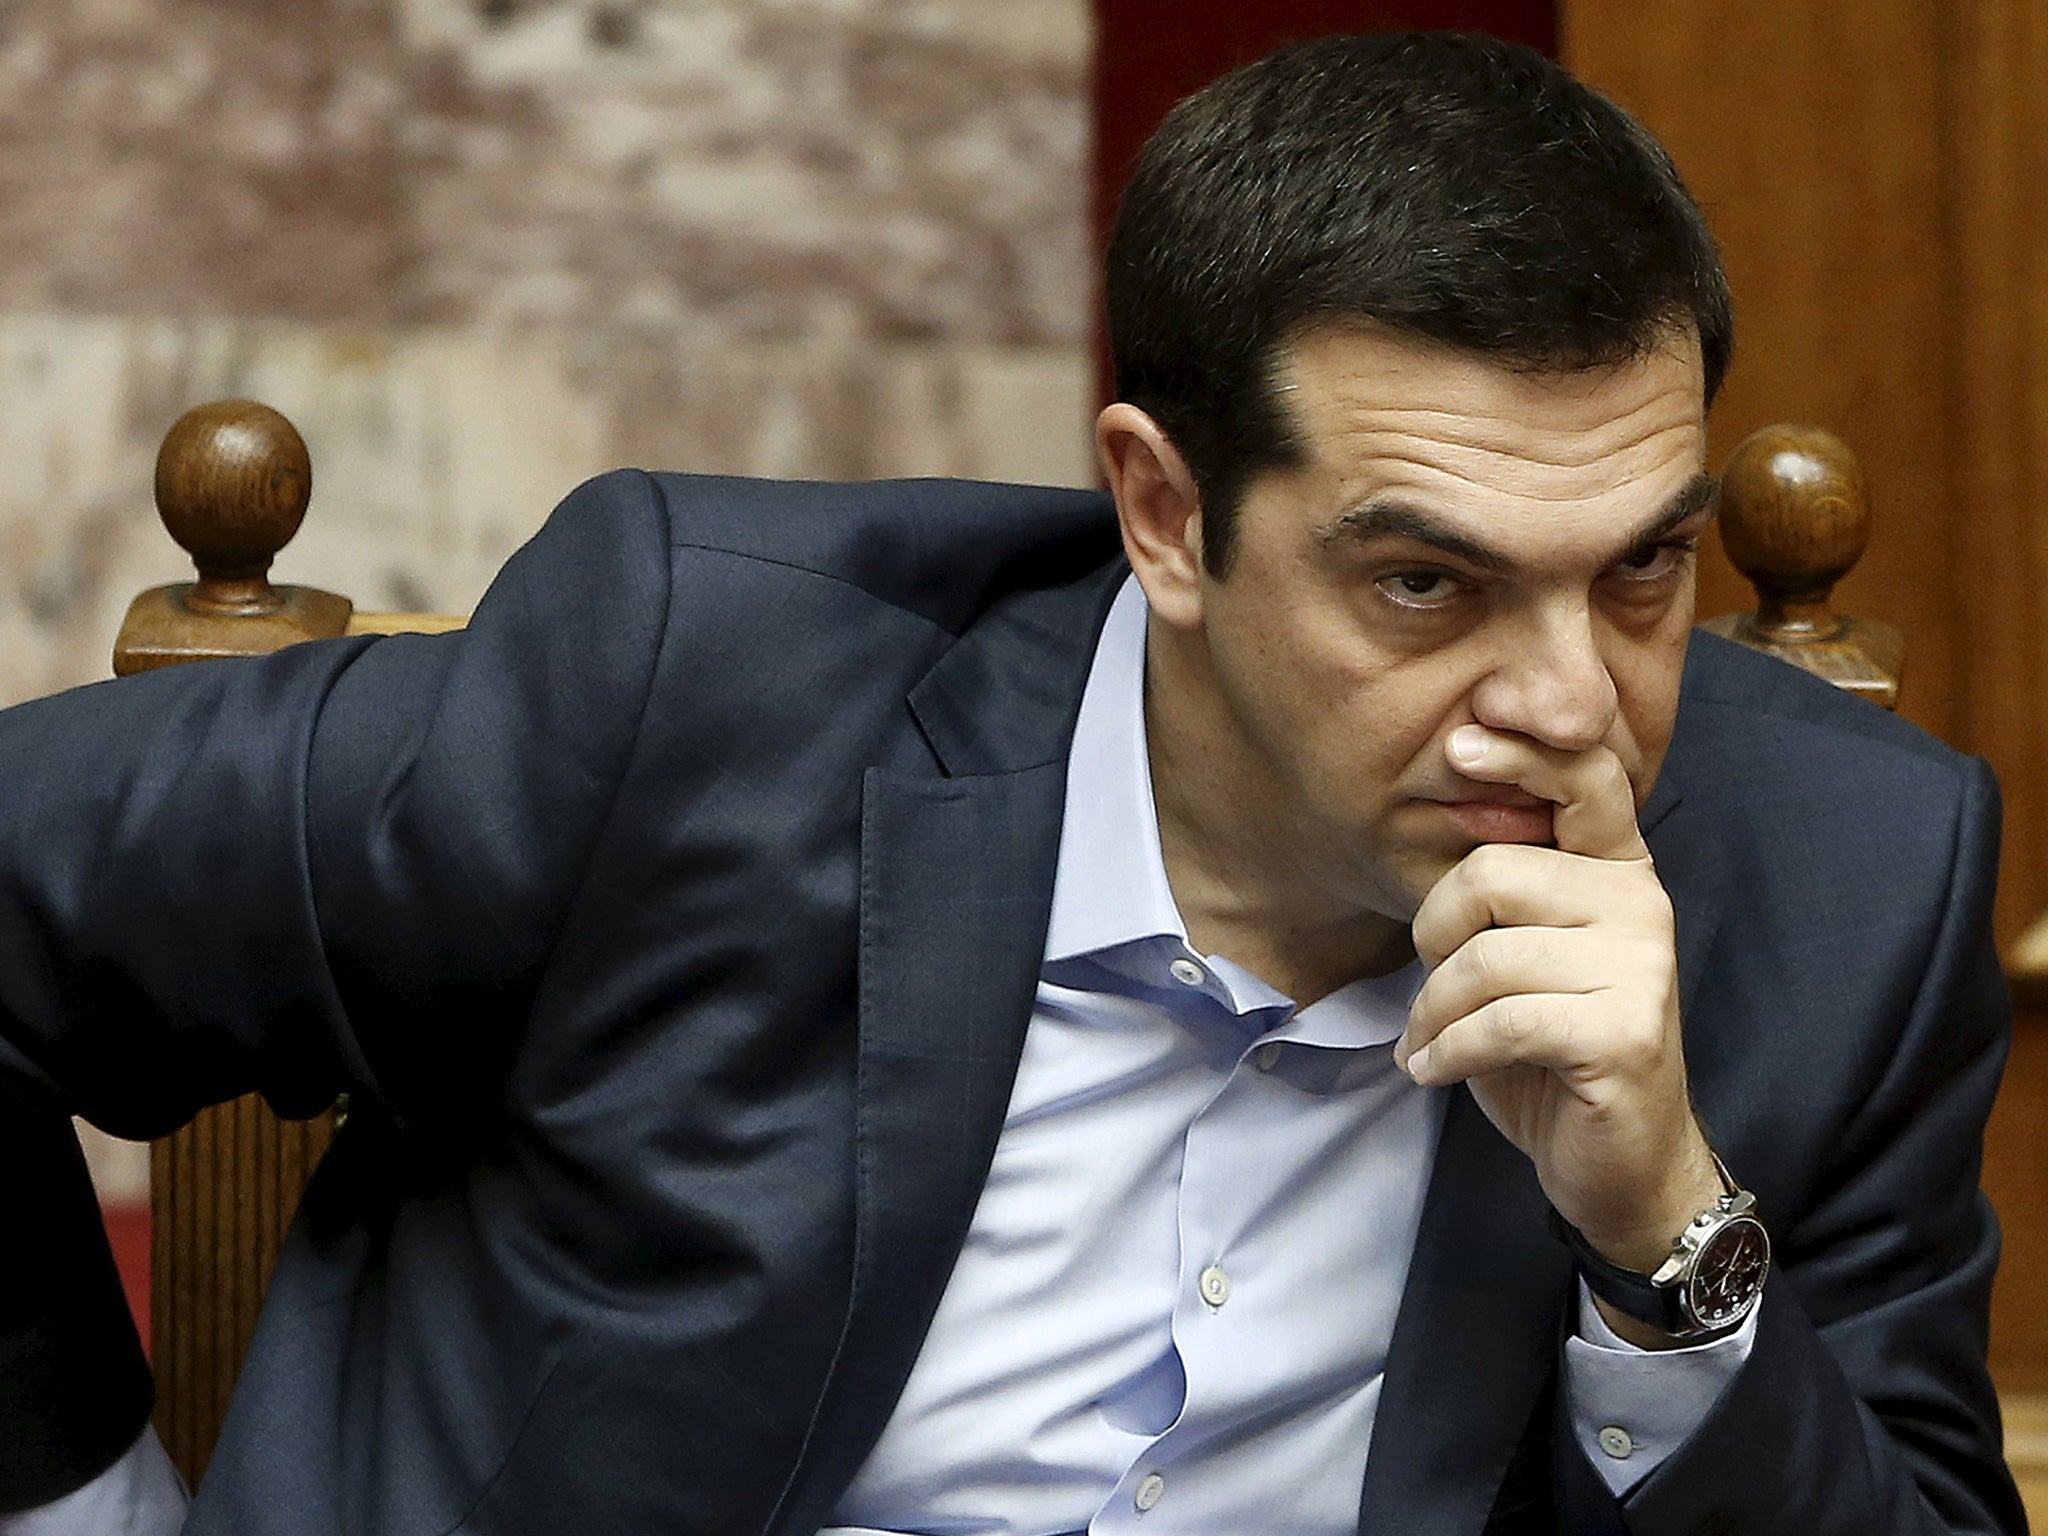 PM Alexis Tsipras was elected on an anti-austerity platform